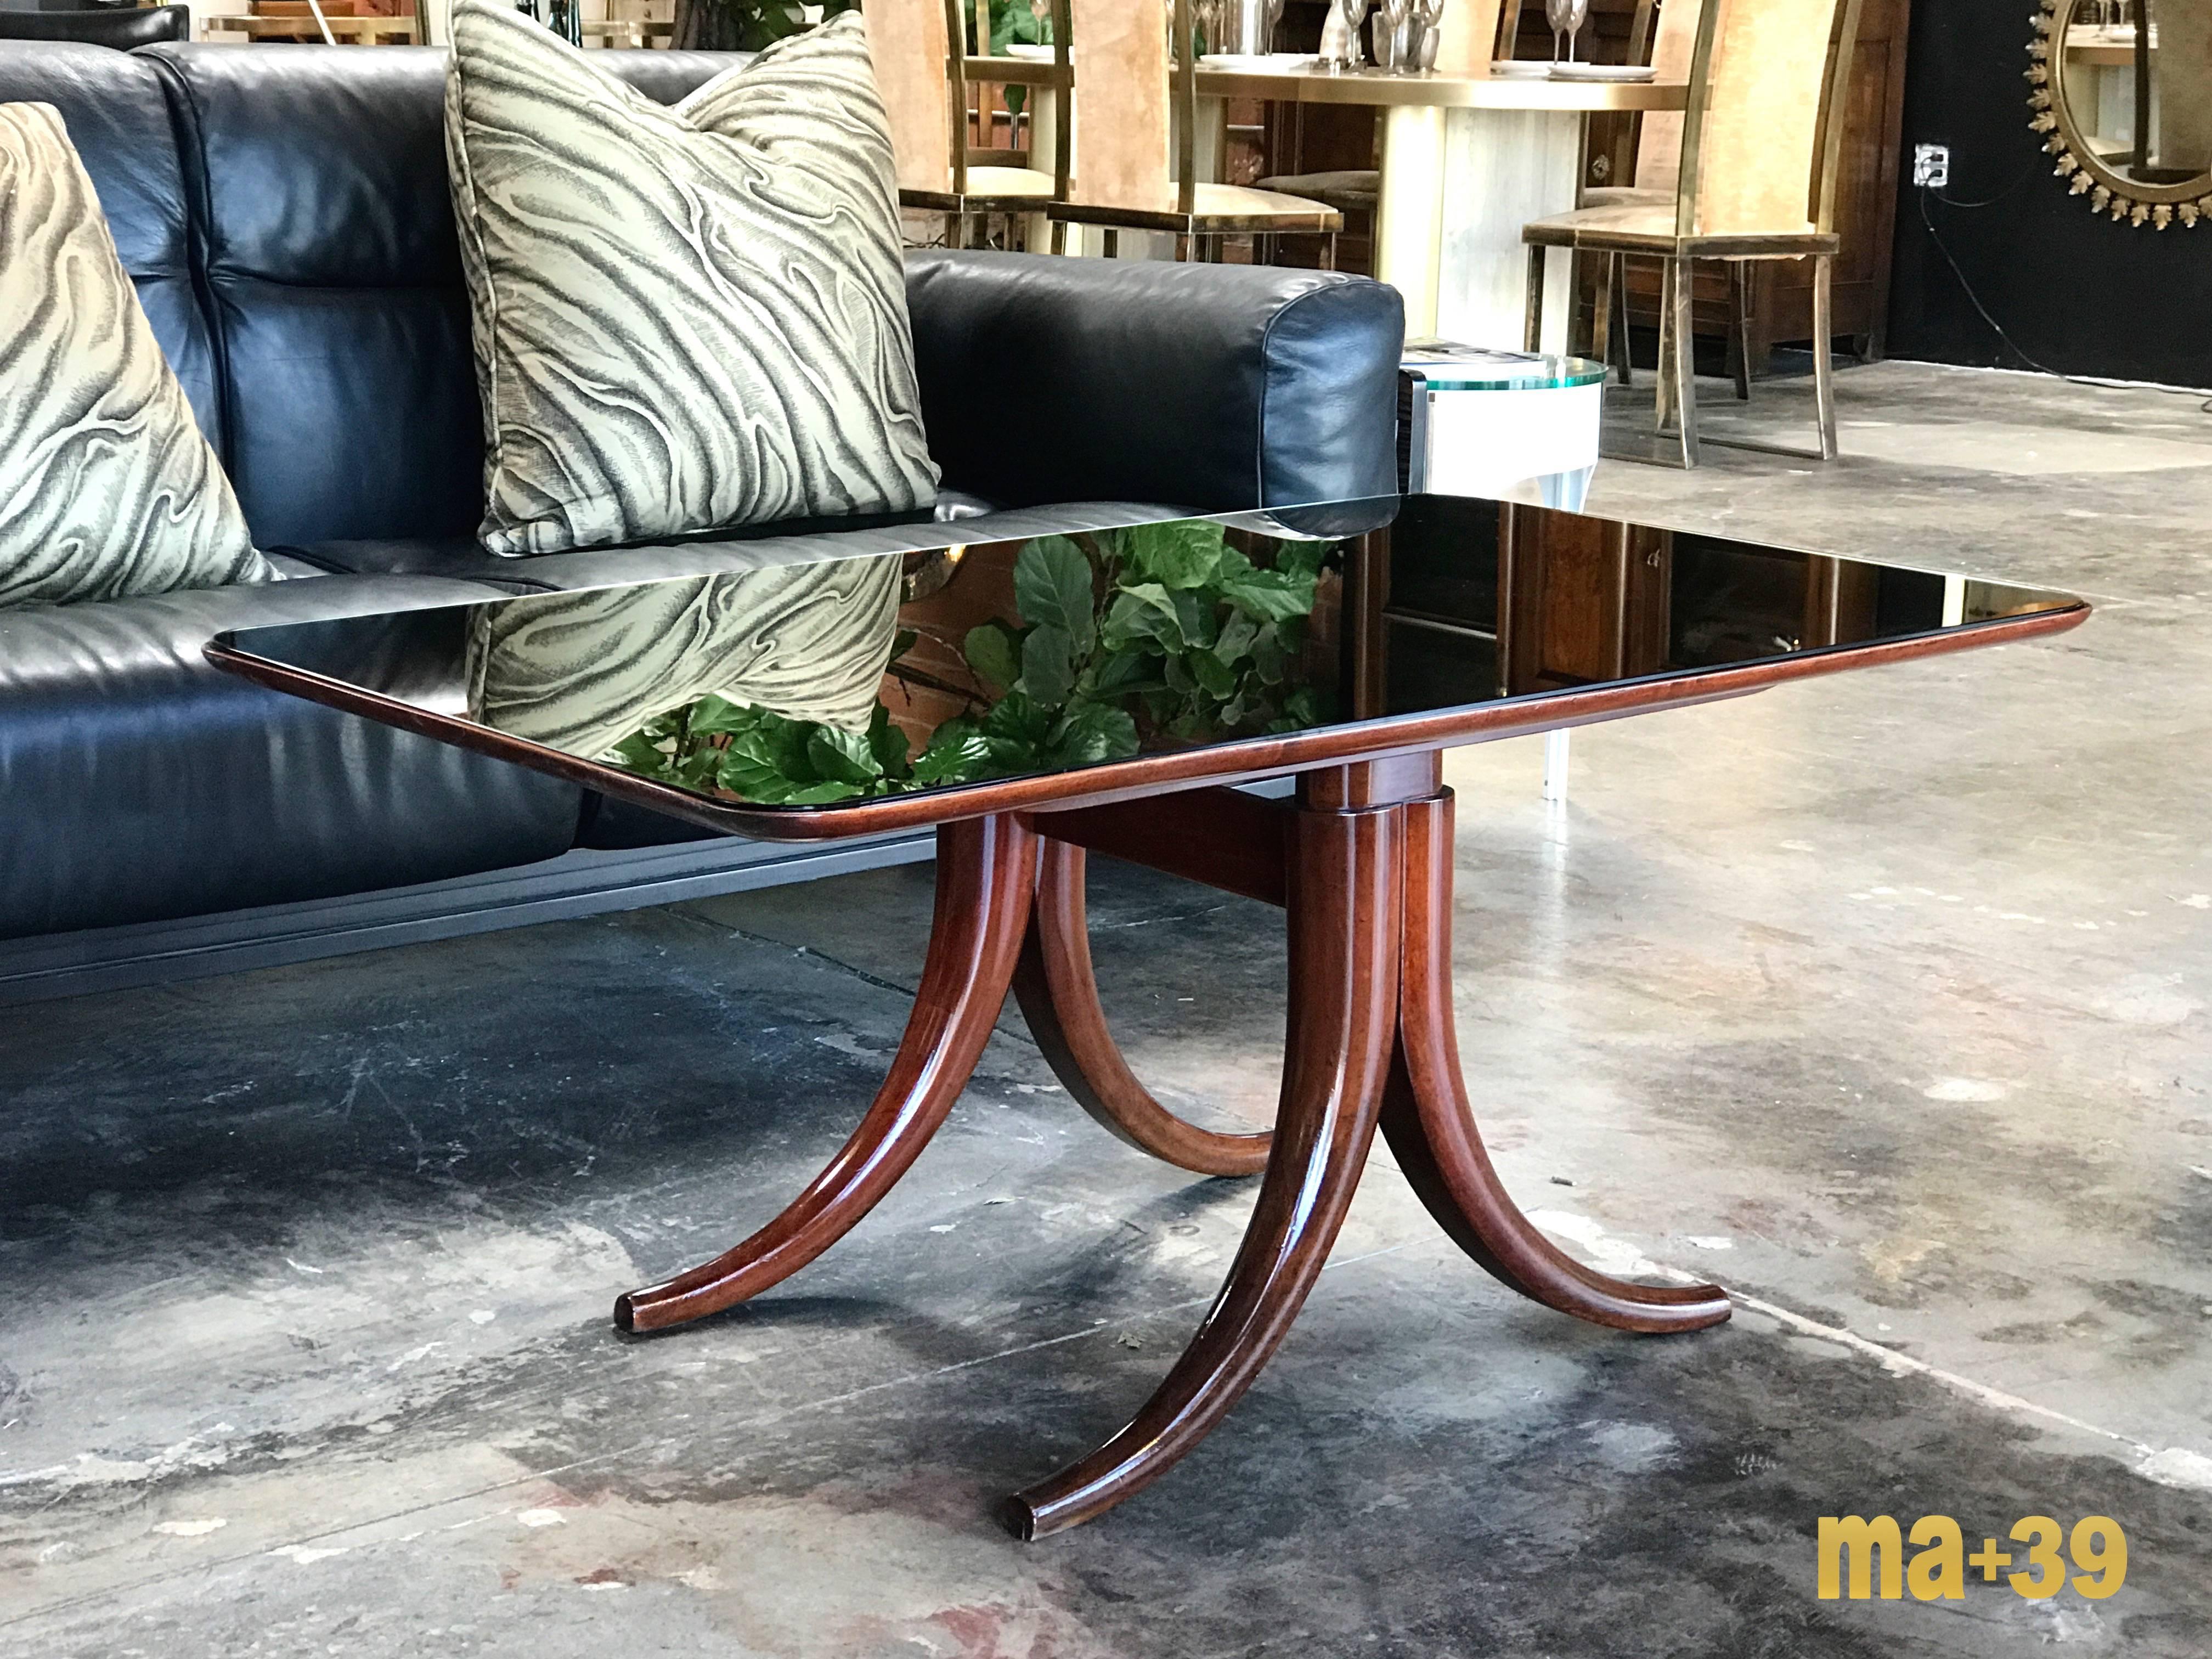 This table is just that a timeless elegant  image of a great Italian designer
